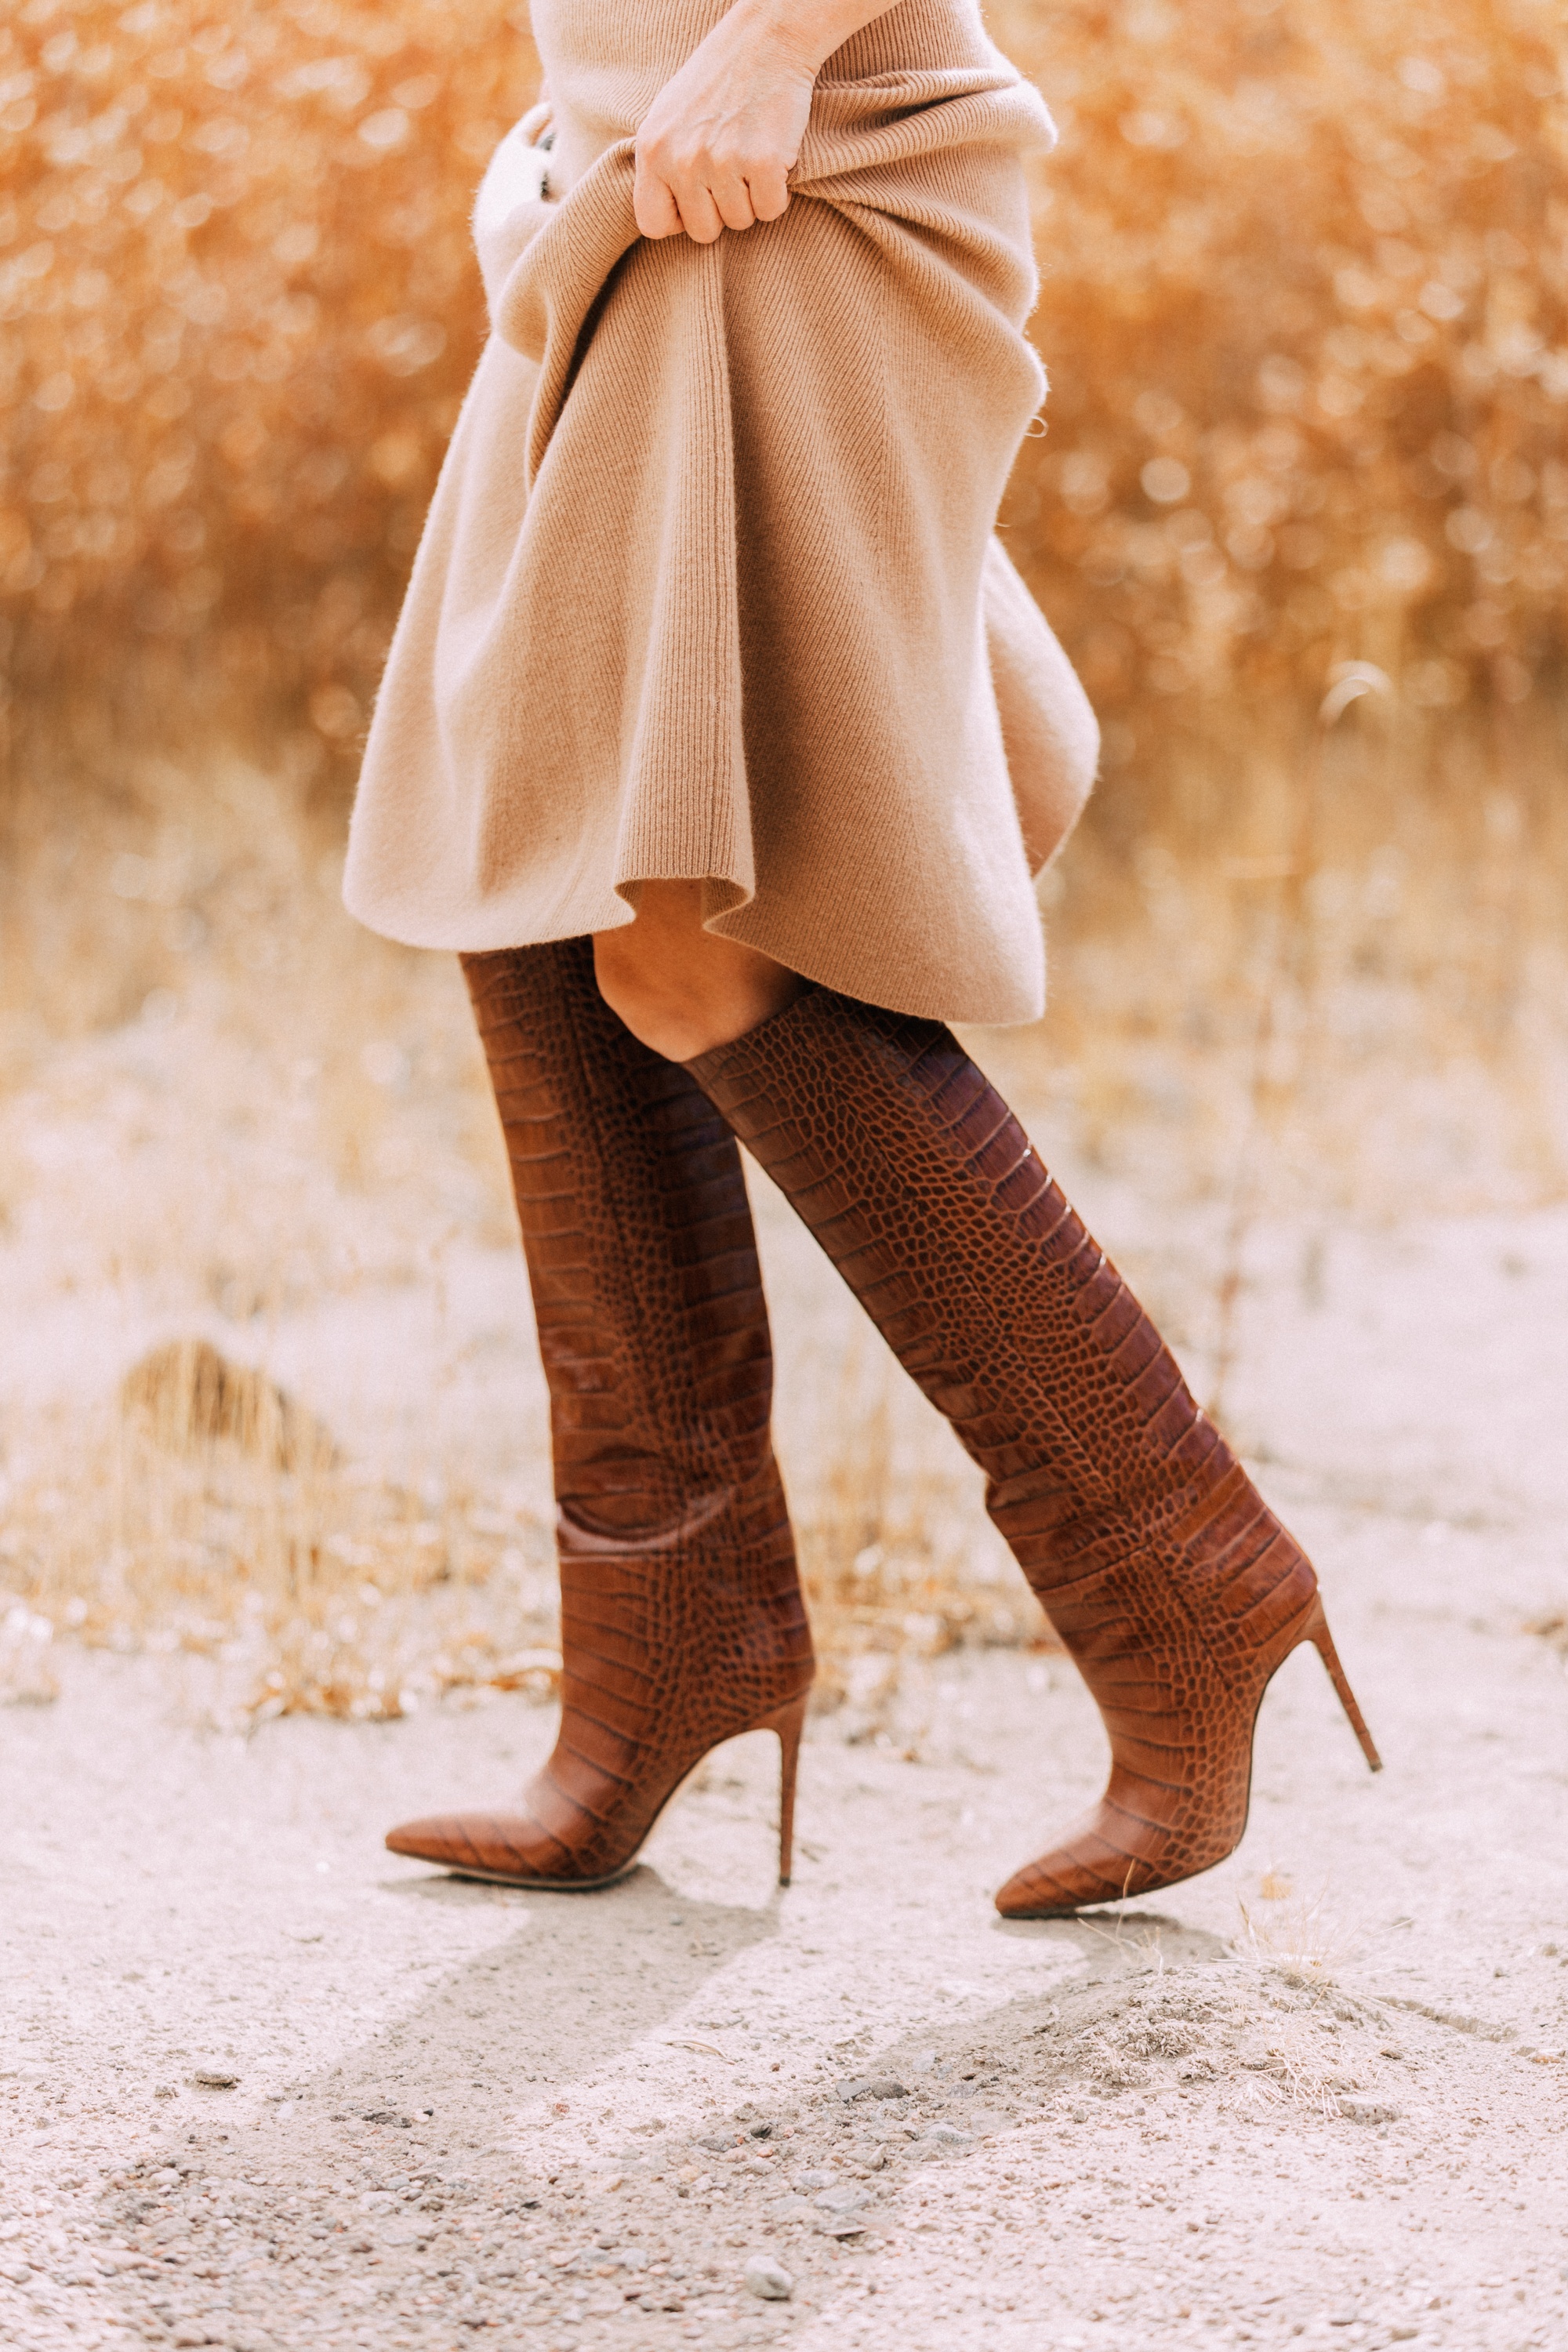 Killer Brown Boots, Fashion Blogger Erin Busbee of BusbeeStyle.com wearing a camel sweater dress by Nordstrom Signature with a Valentino waist belt and brown Paris Texas croc-embossed boots in Telluride, CO, Get Stains Out of Leather and Suede Shoes